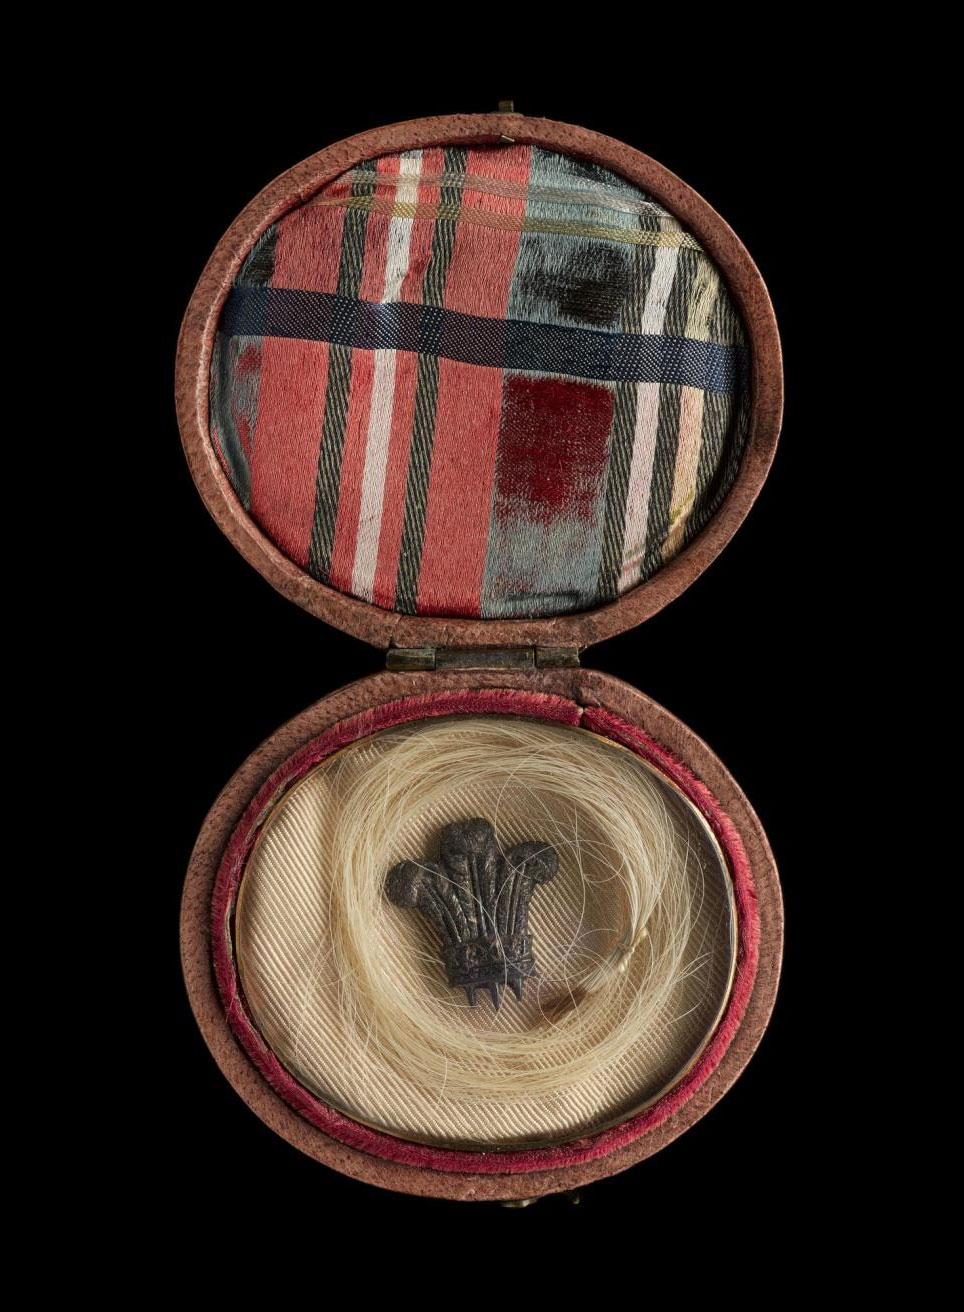 Locks of hair were a commonly found on such ‘relics’ purporting to be from the prince. This small locket contains hair alleged to have been that of Prince Charles Edward Stuart, with Prince of Wales feathers in the centre.